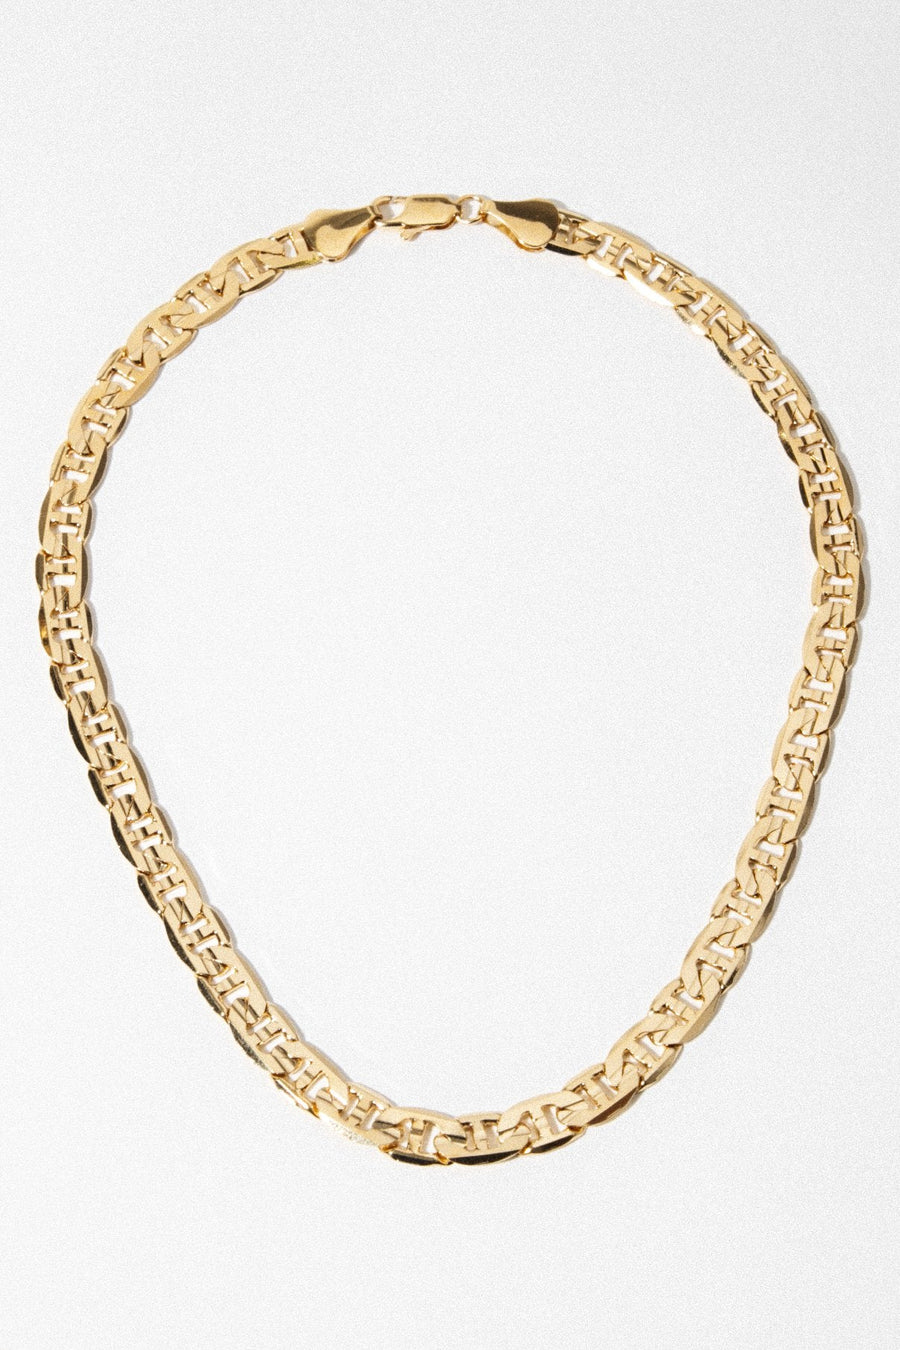 Sparrow Jewelry Gold / 18 Inches The Tiras Necklace